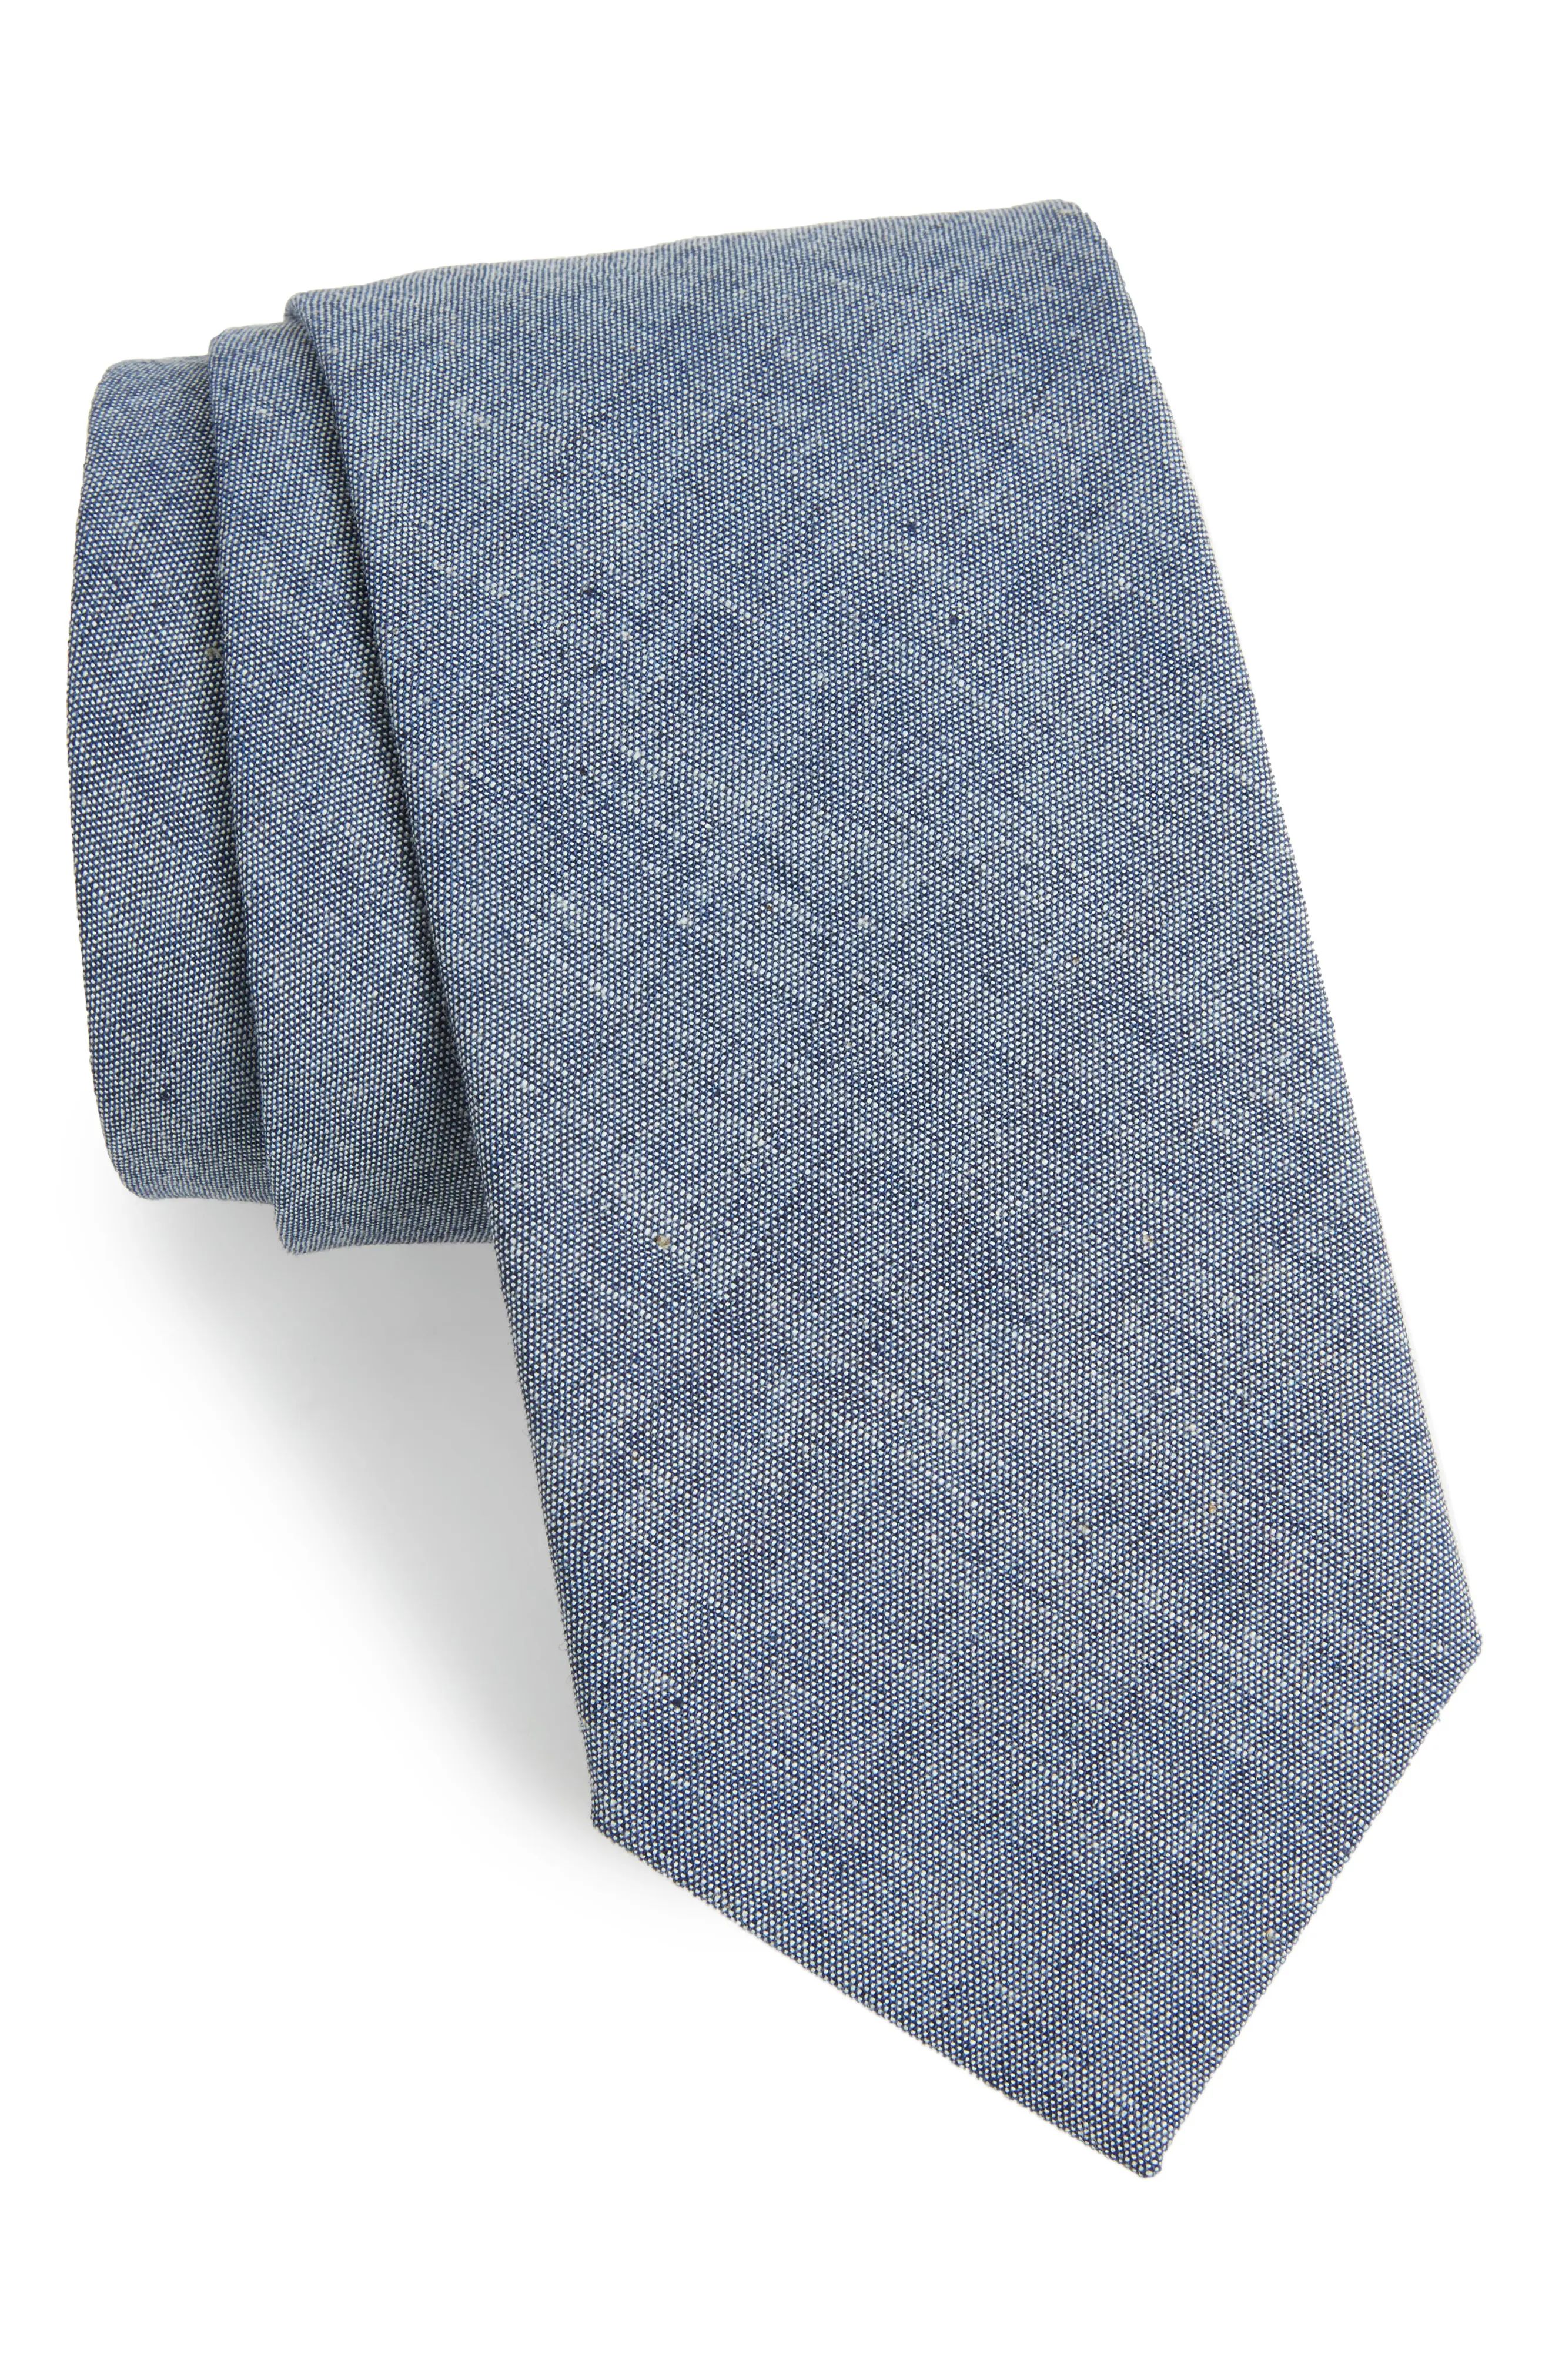 Chambray Cotton Tie | Nordstrom